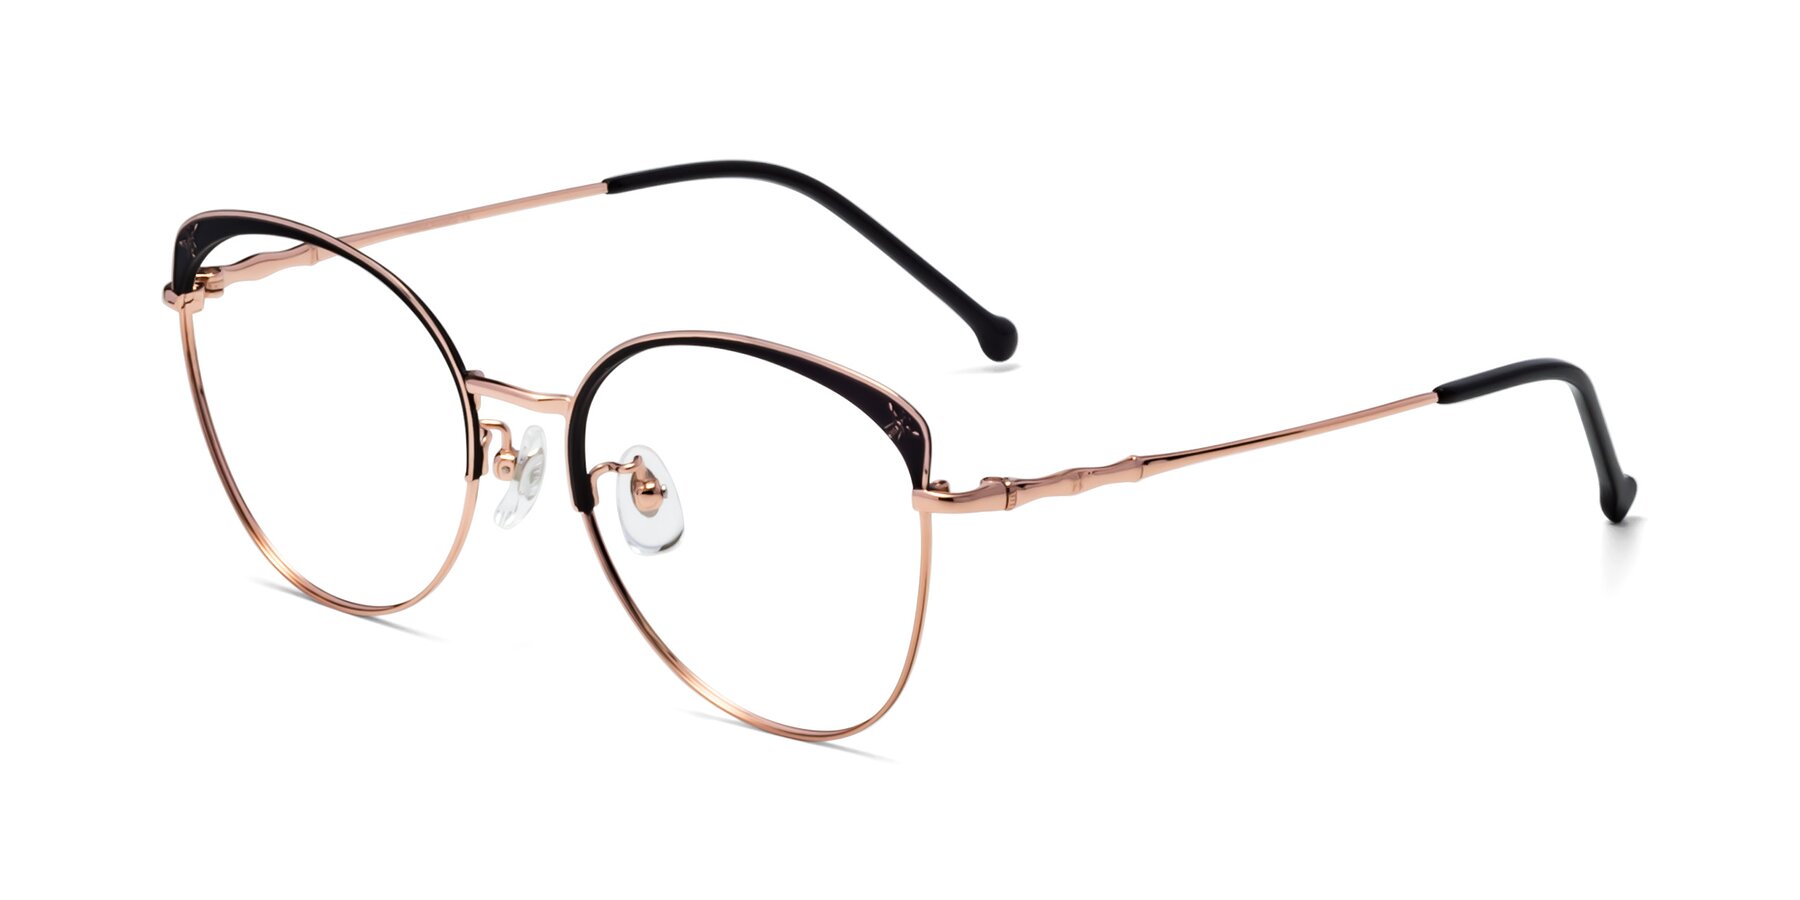 Angle of 18019 in Black-Rose Gold with Clear Blue Light Blocking Lenses